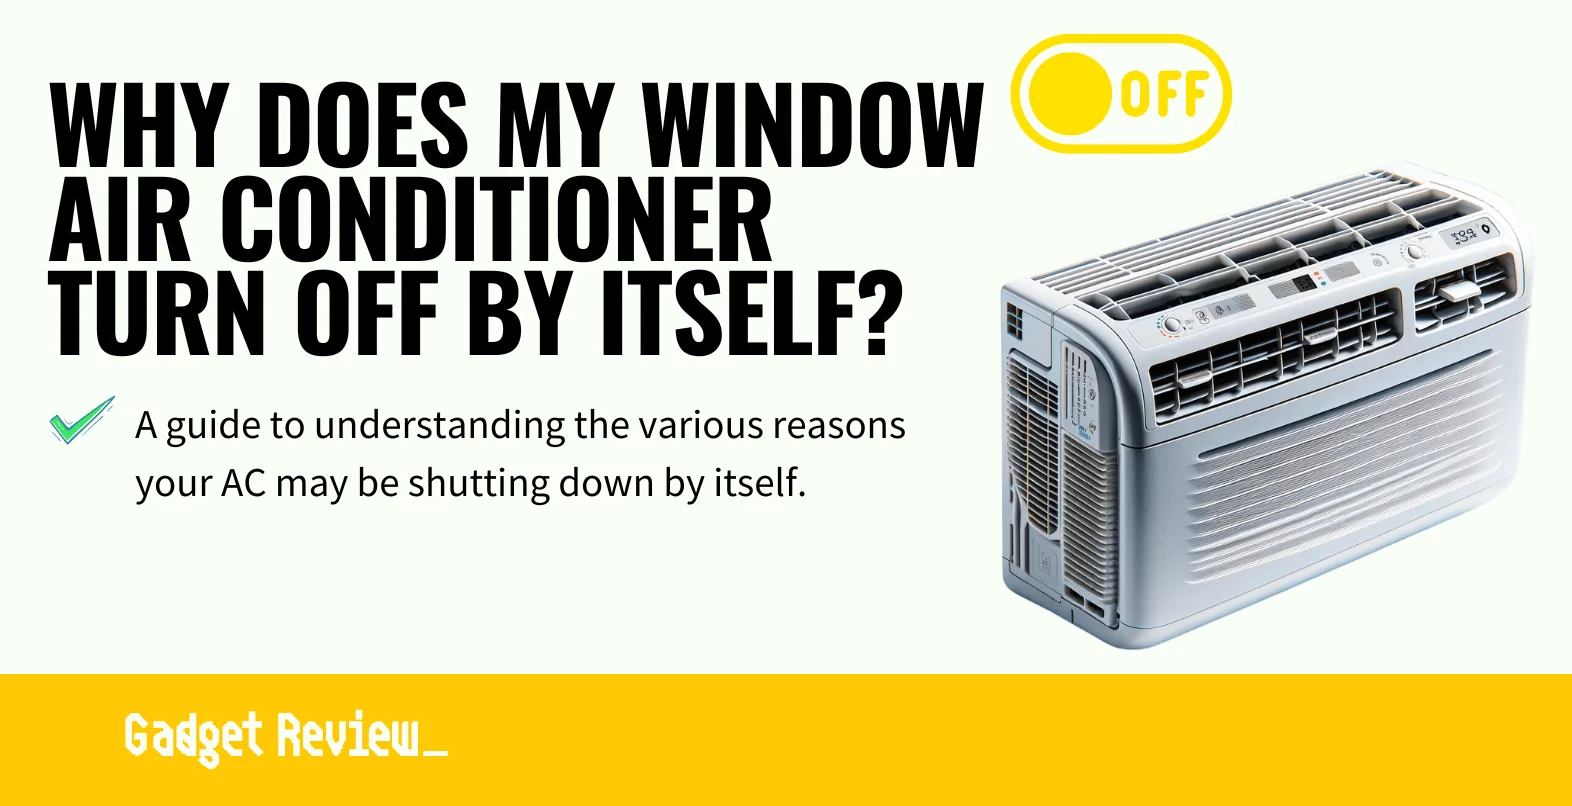 Why Does My Window Air Conditioner Turn Off By Itself?